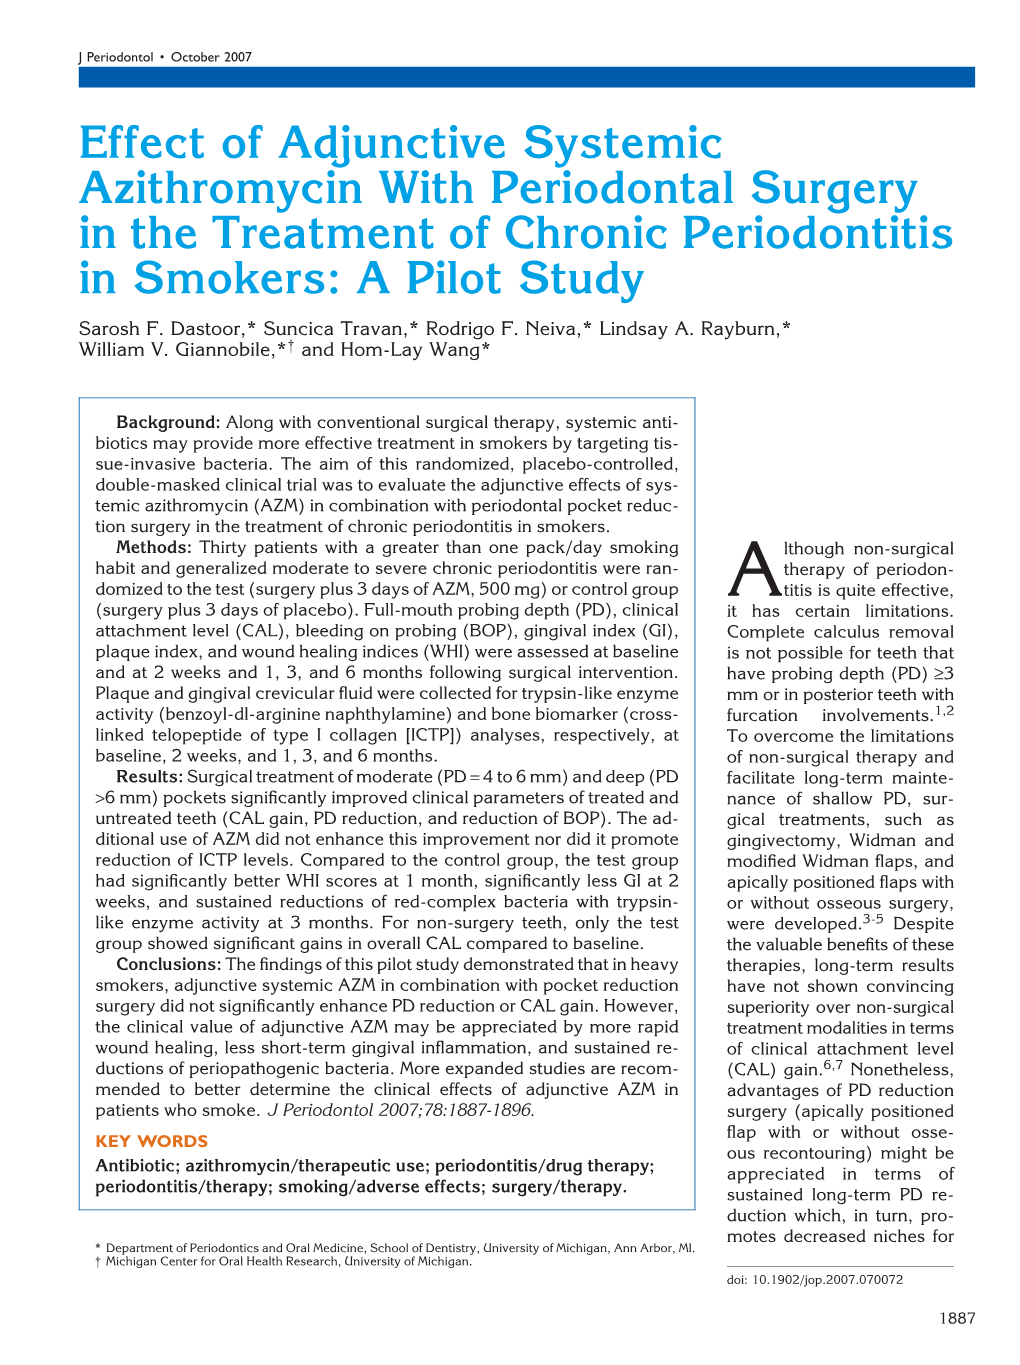 Effect of Adjunctive Systemic Azithromycin with Periodontal Surgery in the Treatment of Chronic Periodontitis in Smokers: a Pilot Study Sarosh F